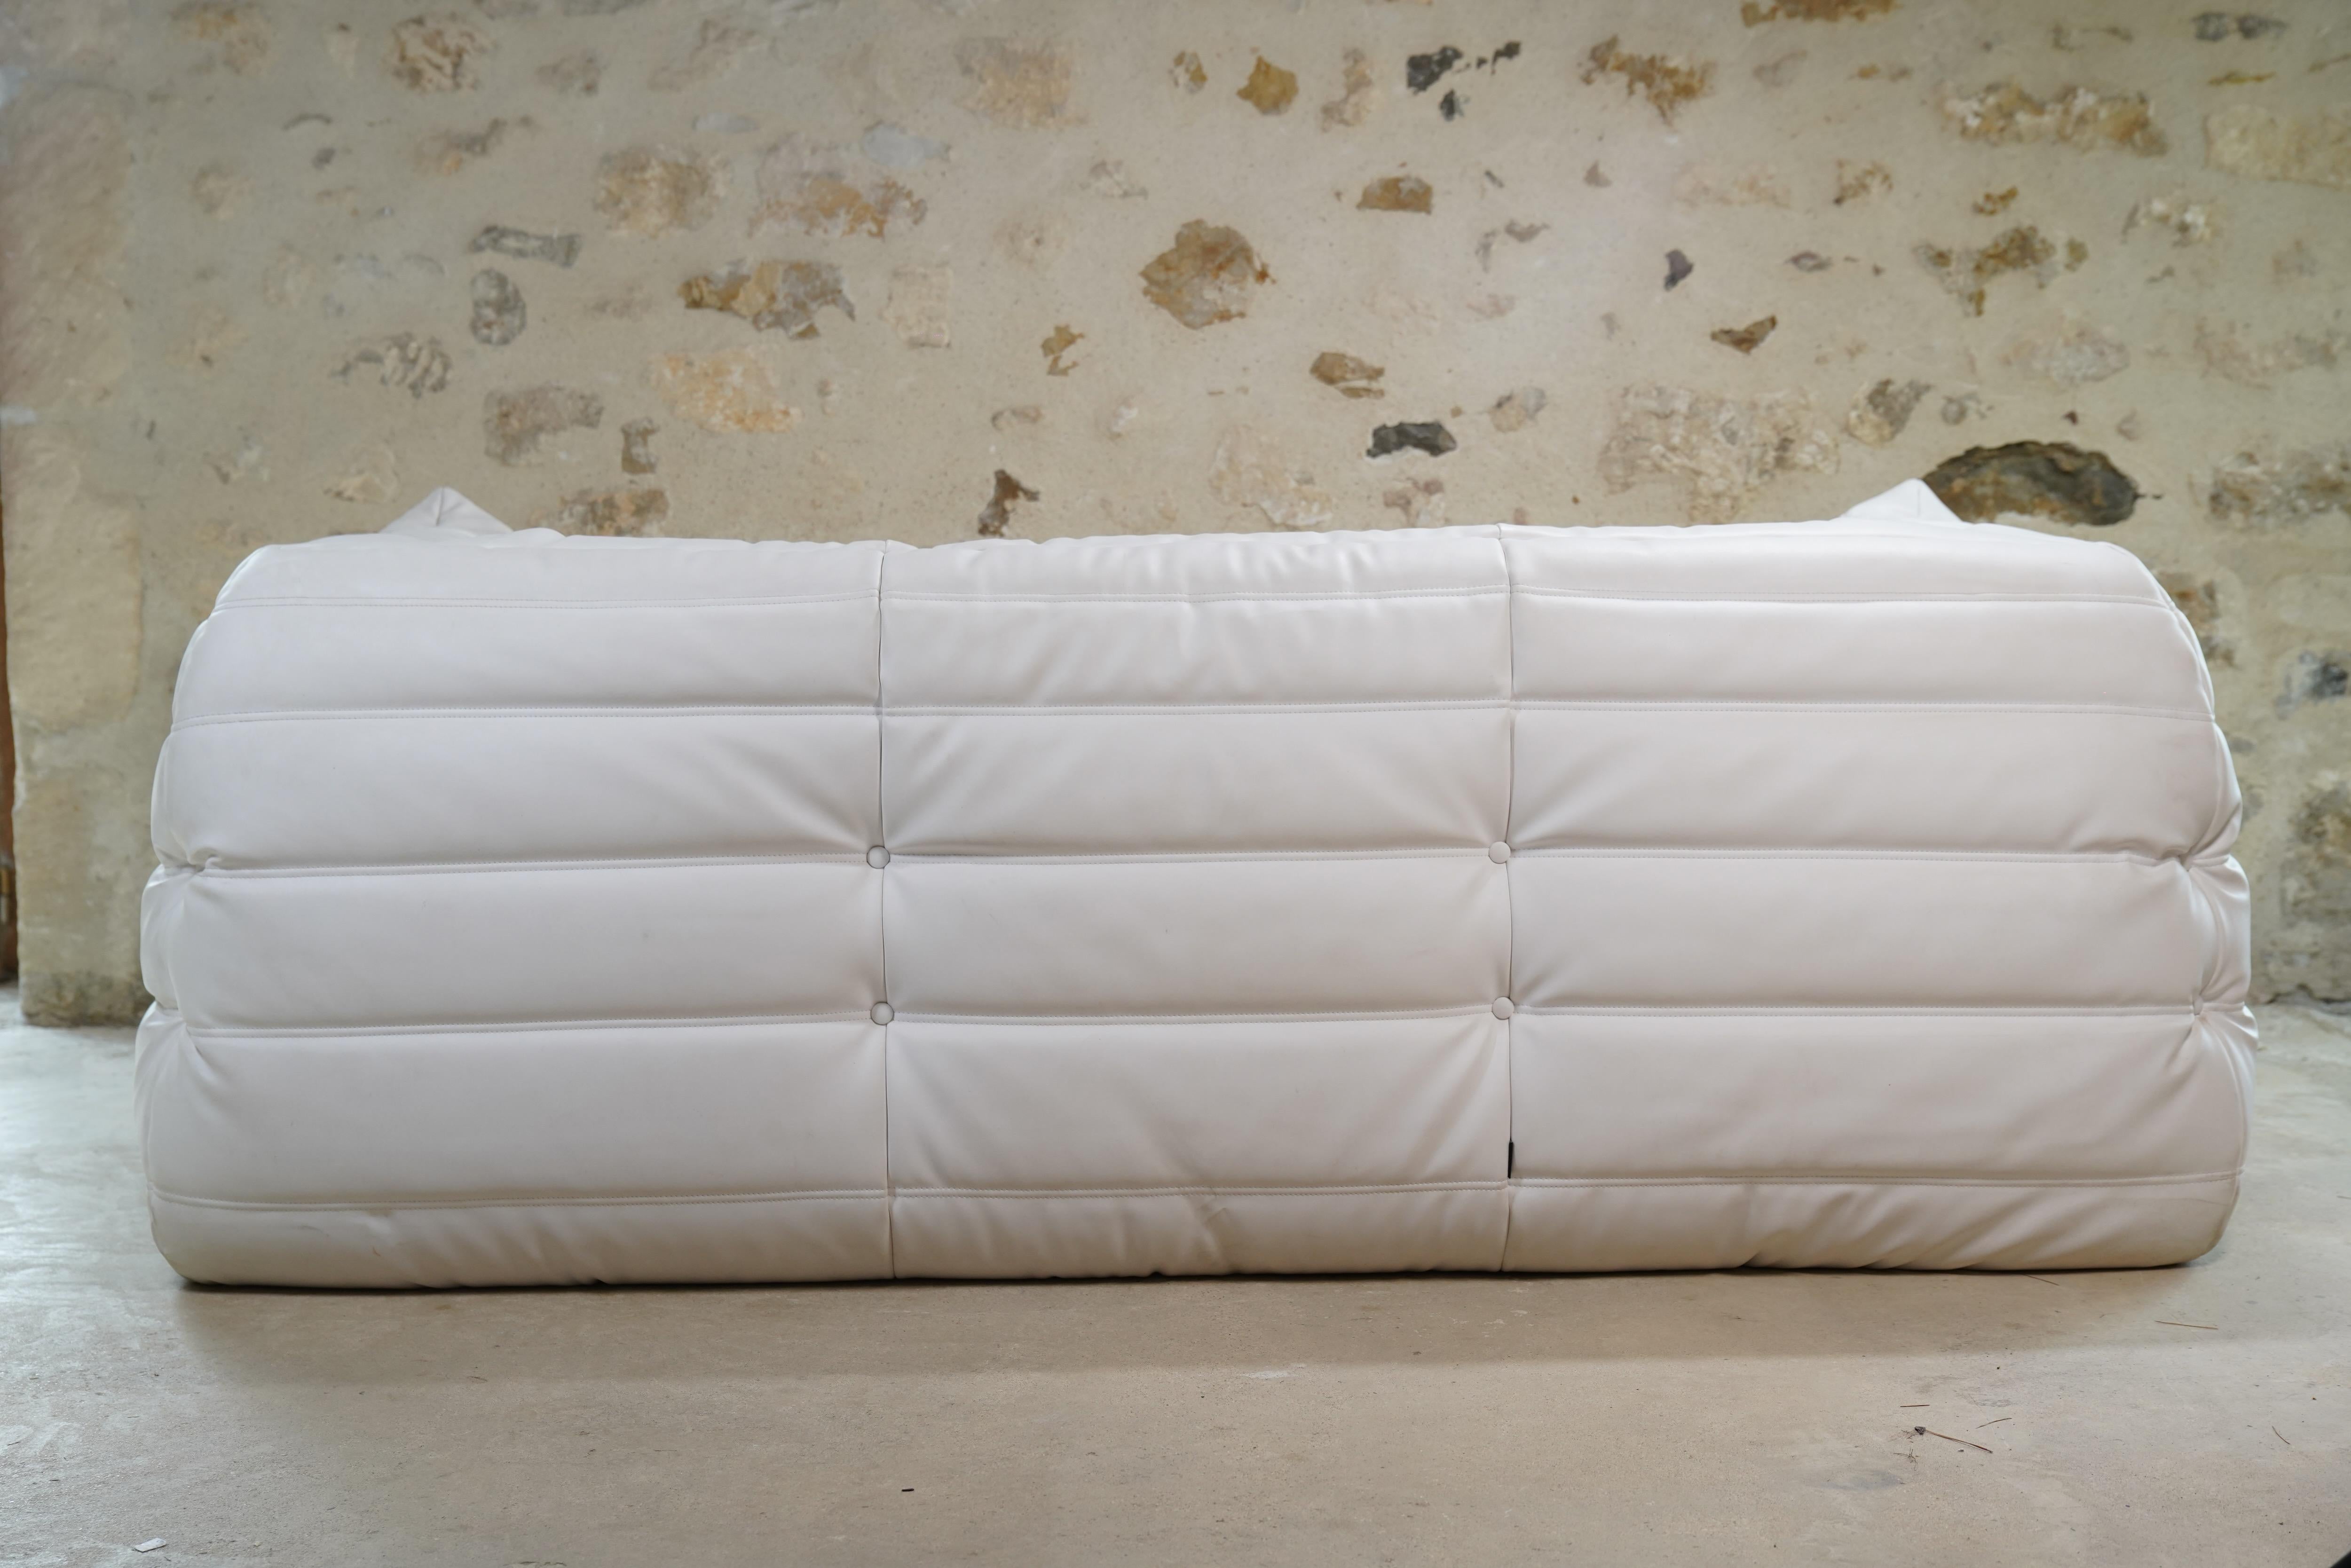 French White Leather Three-Seater Togo Sofa w/ Arms by Ligne Roset, 2008 (2 Available) For Sale